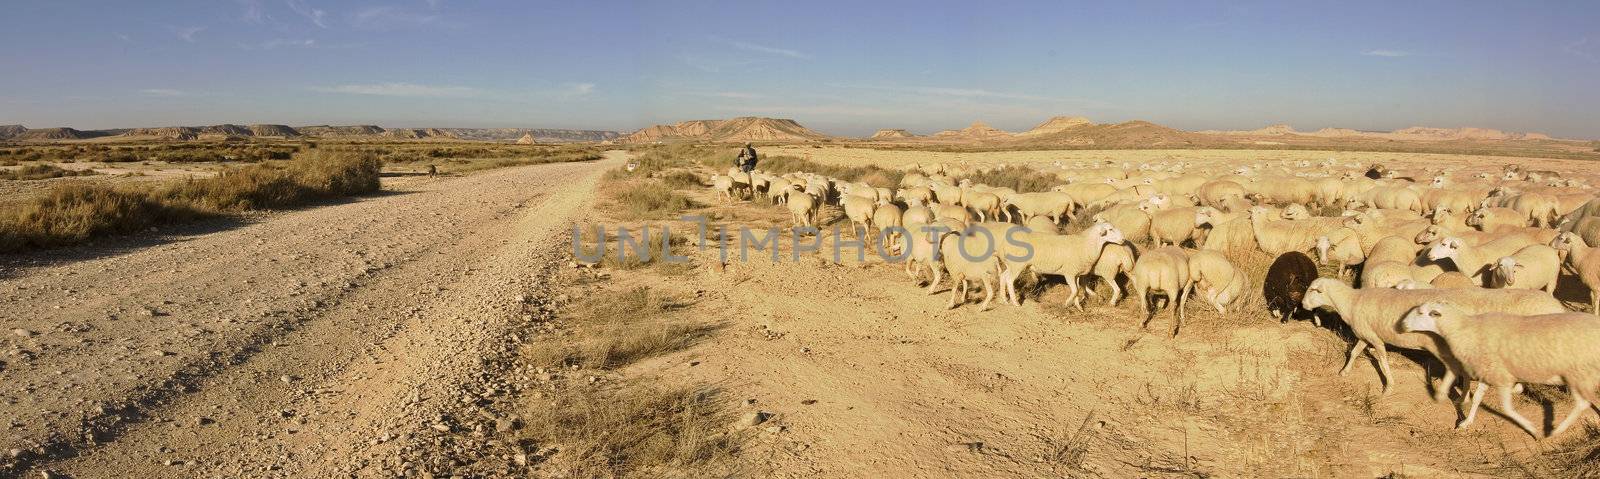 image of a sheperd with the cattle in Las BArdenas, Navarra, Spain